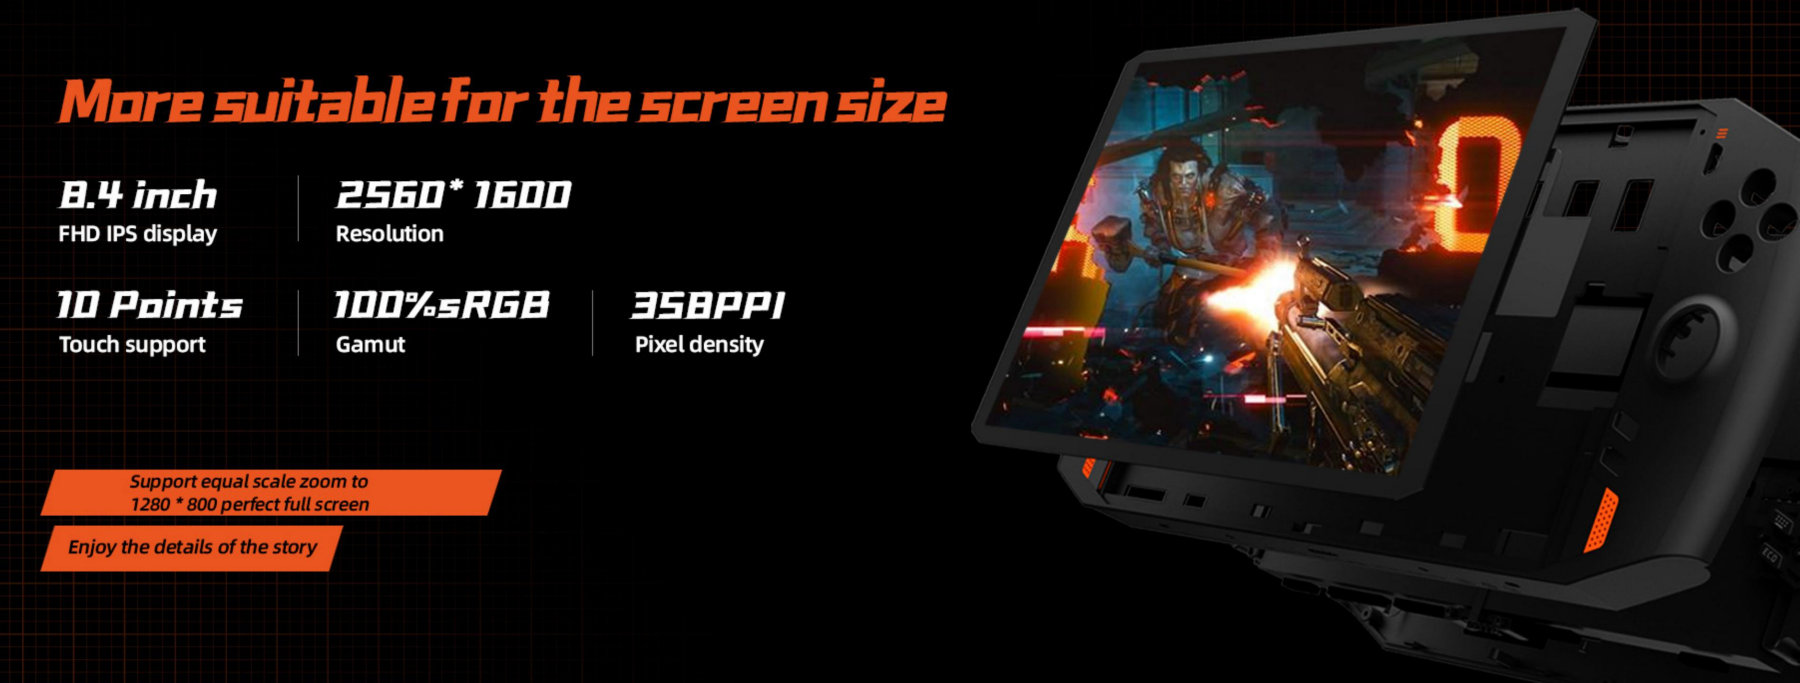 One XPLAYER handheld gaming console features Intel Tiger Lake and 